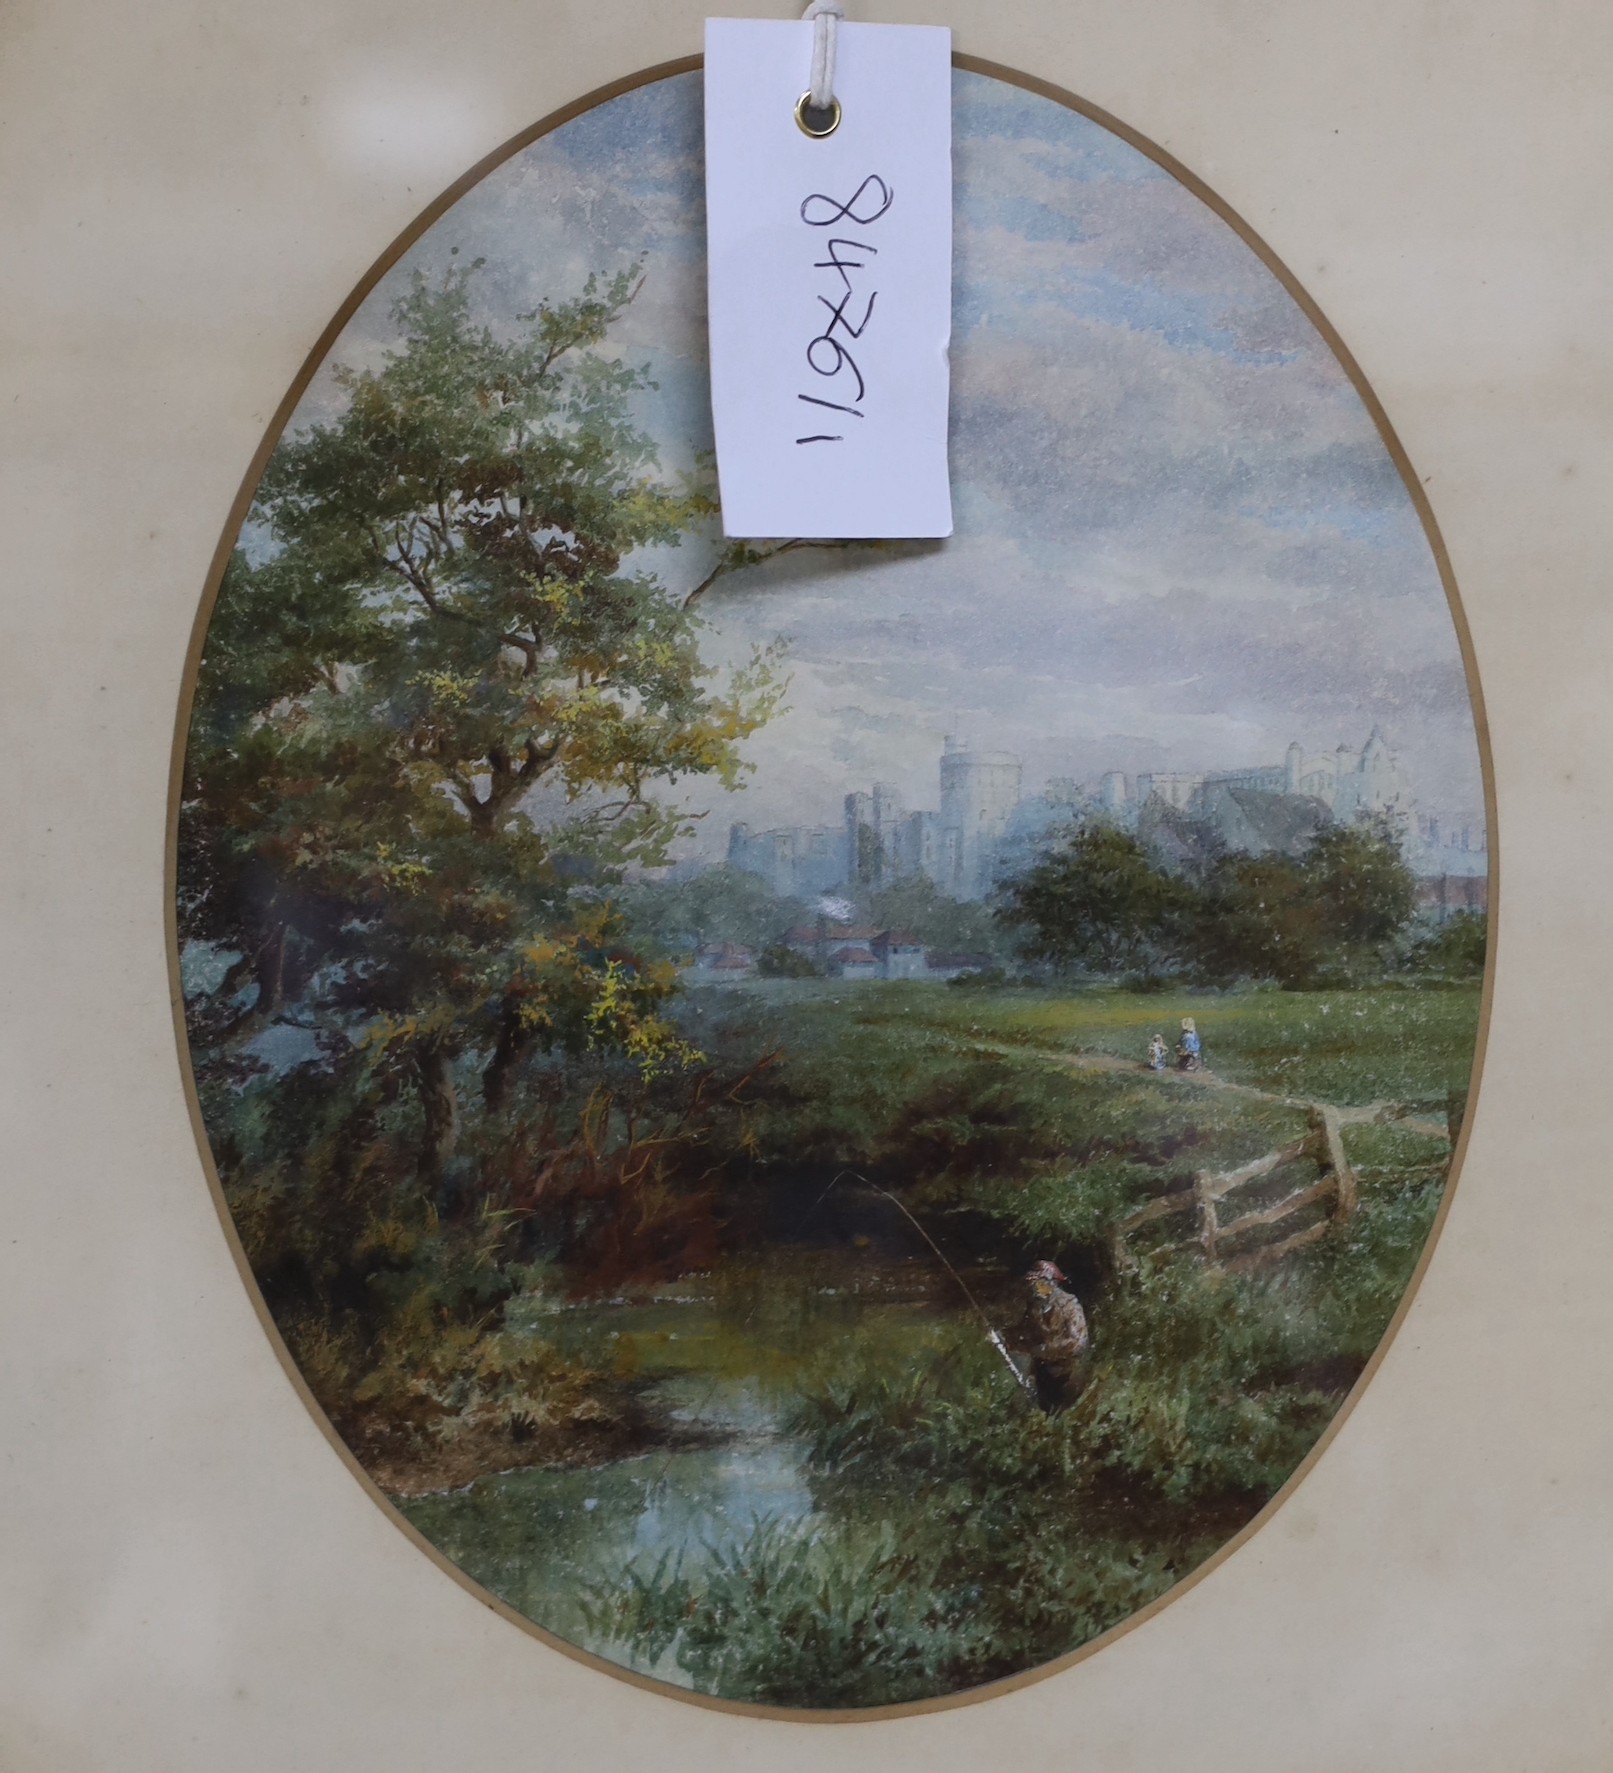 British School, 19th century, four watercolours, Rural and woodland scenes, in matching frames, 23 x 18cm